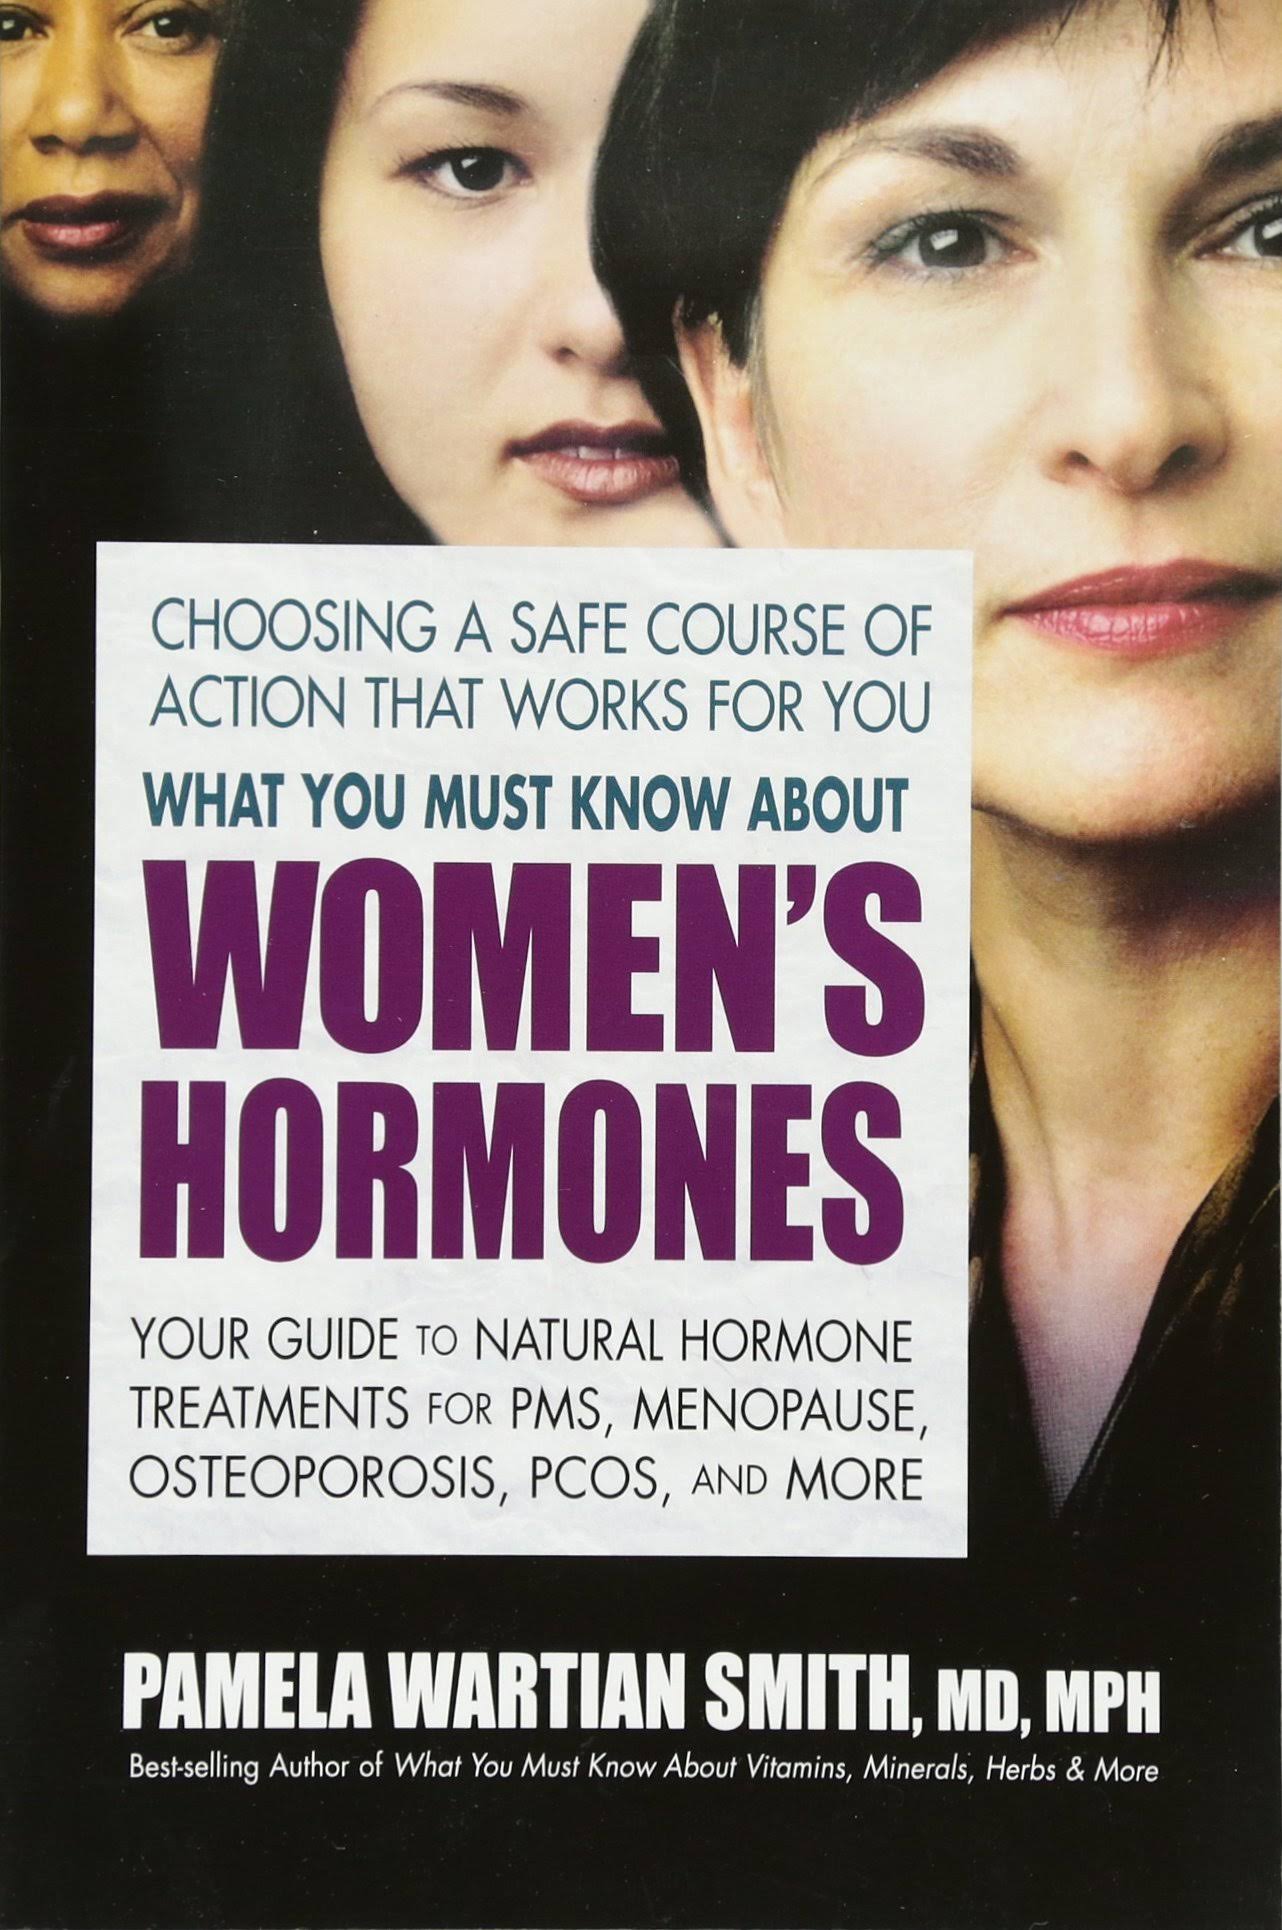 What You Must Know About Women's Hormones - Pamela Wartian Smith